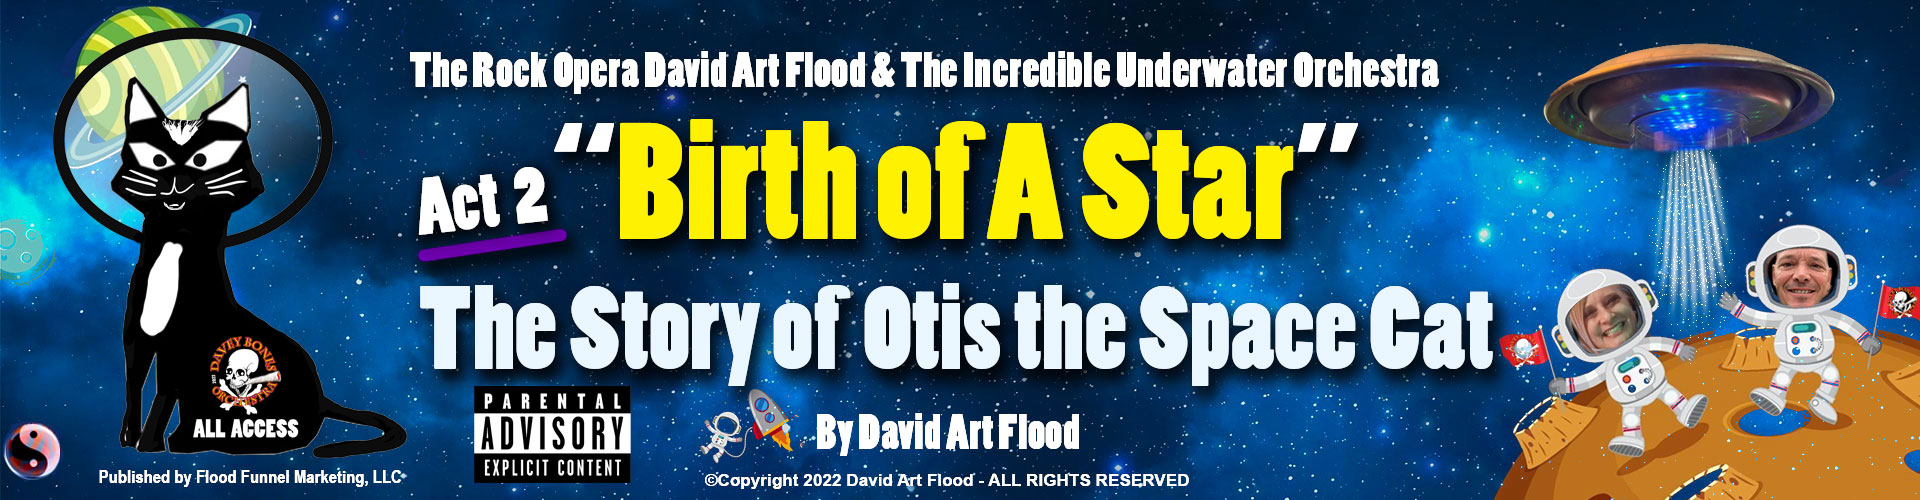 Birth of A Star - The Story of Otis the Space Cat, by David Art Flood